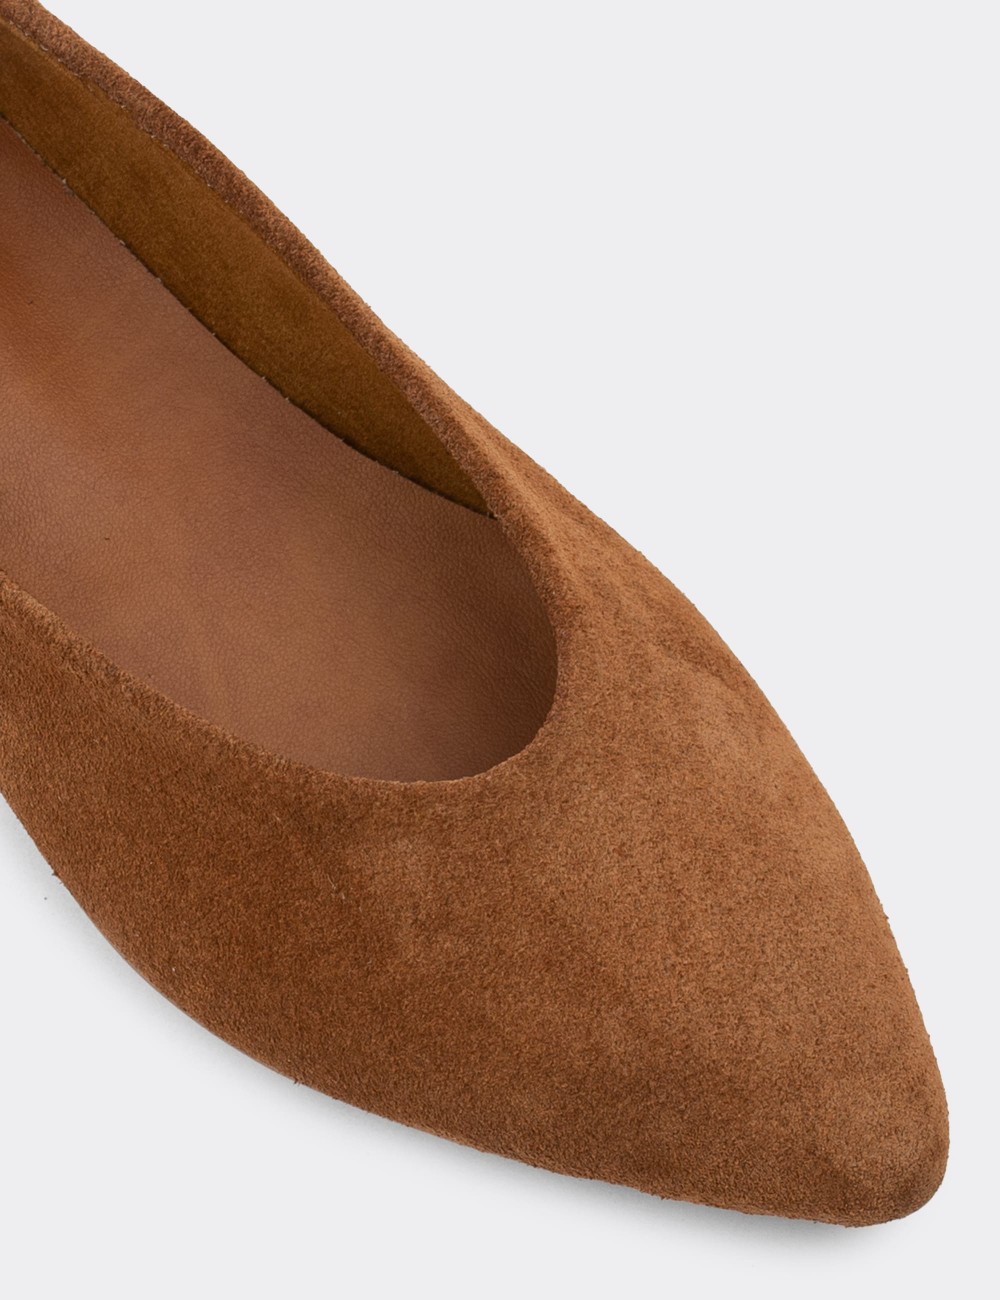 Tan Suede Leather Loafers - 01896ZTBAC01